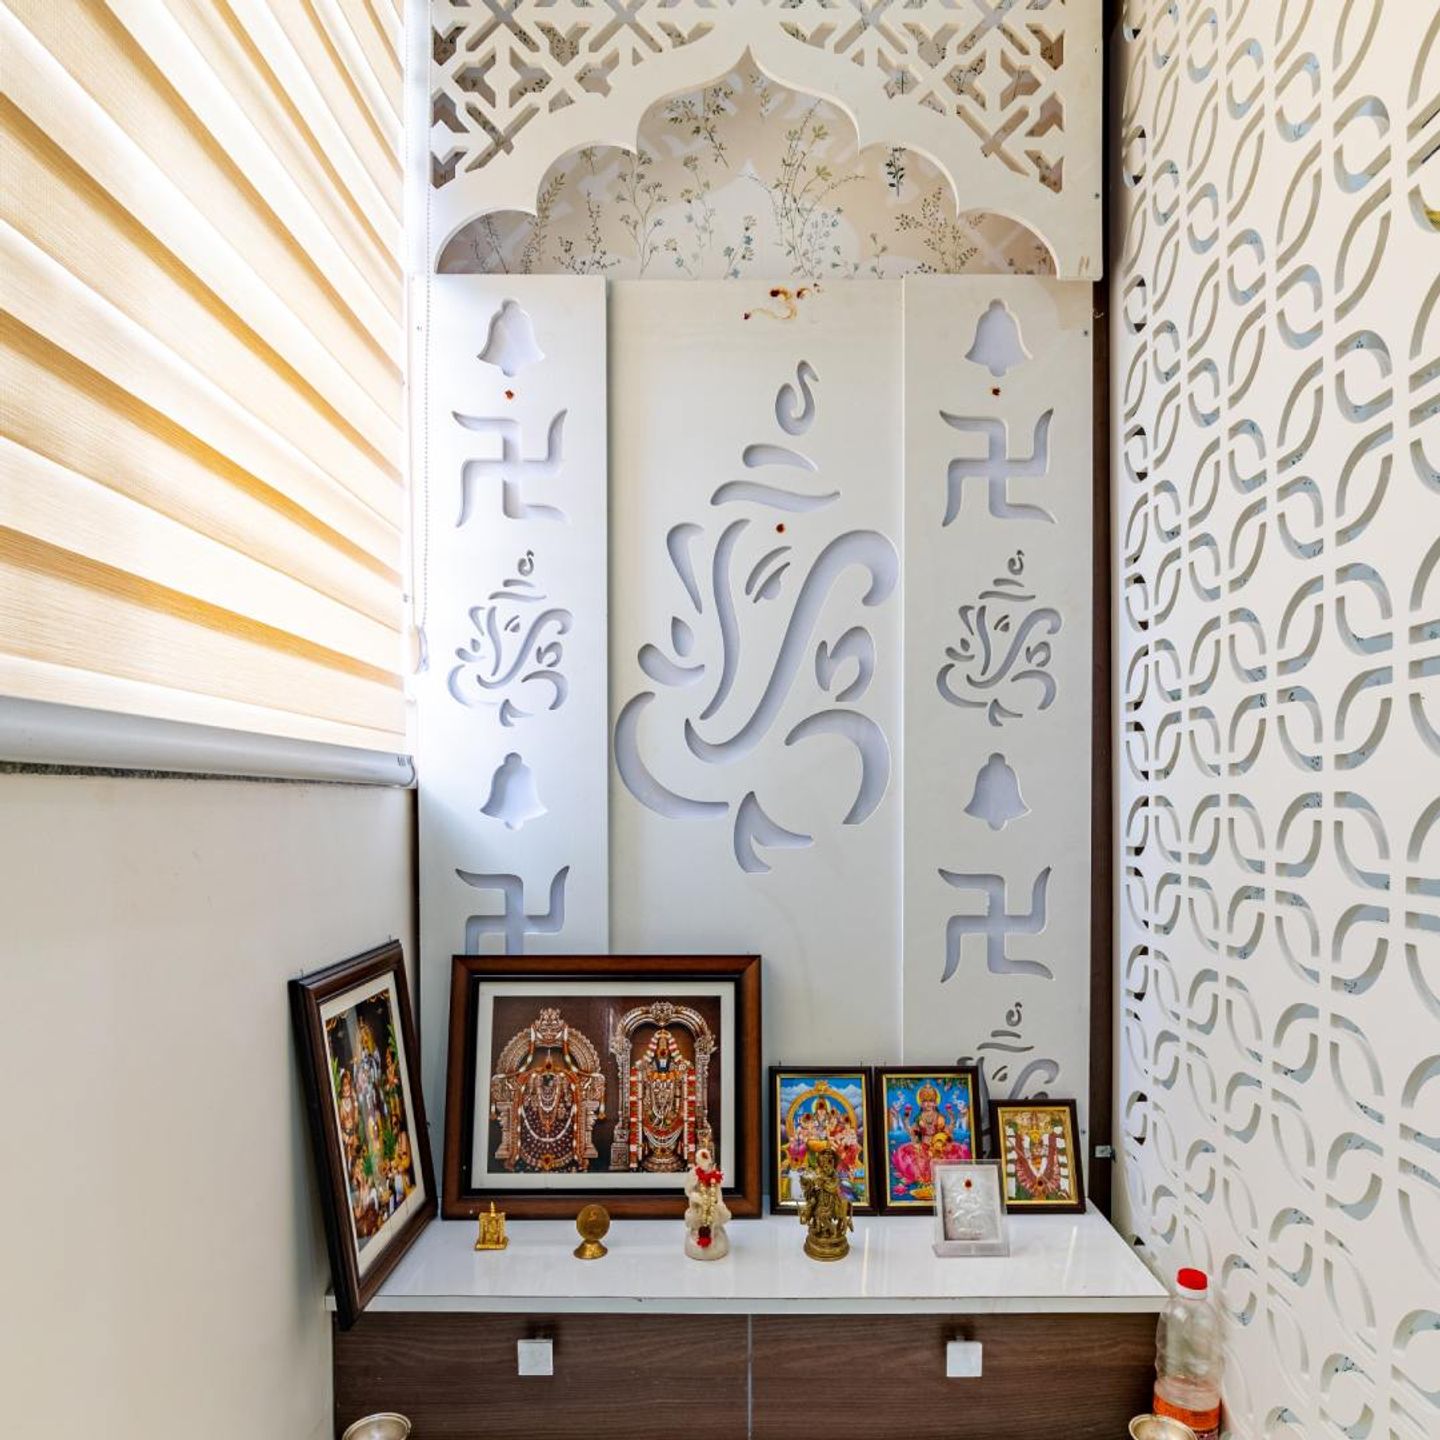 Floor-Mounted Pooja Mandir With White Wall Panelling - Livspace